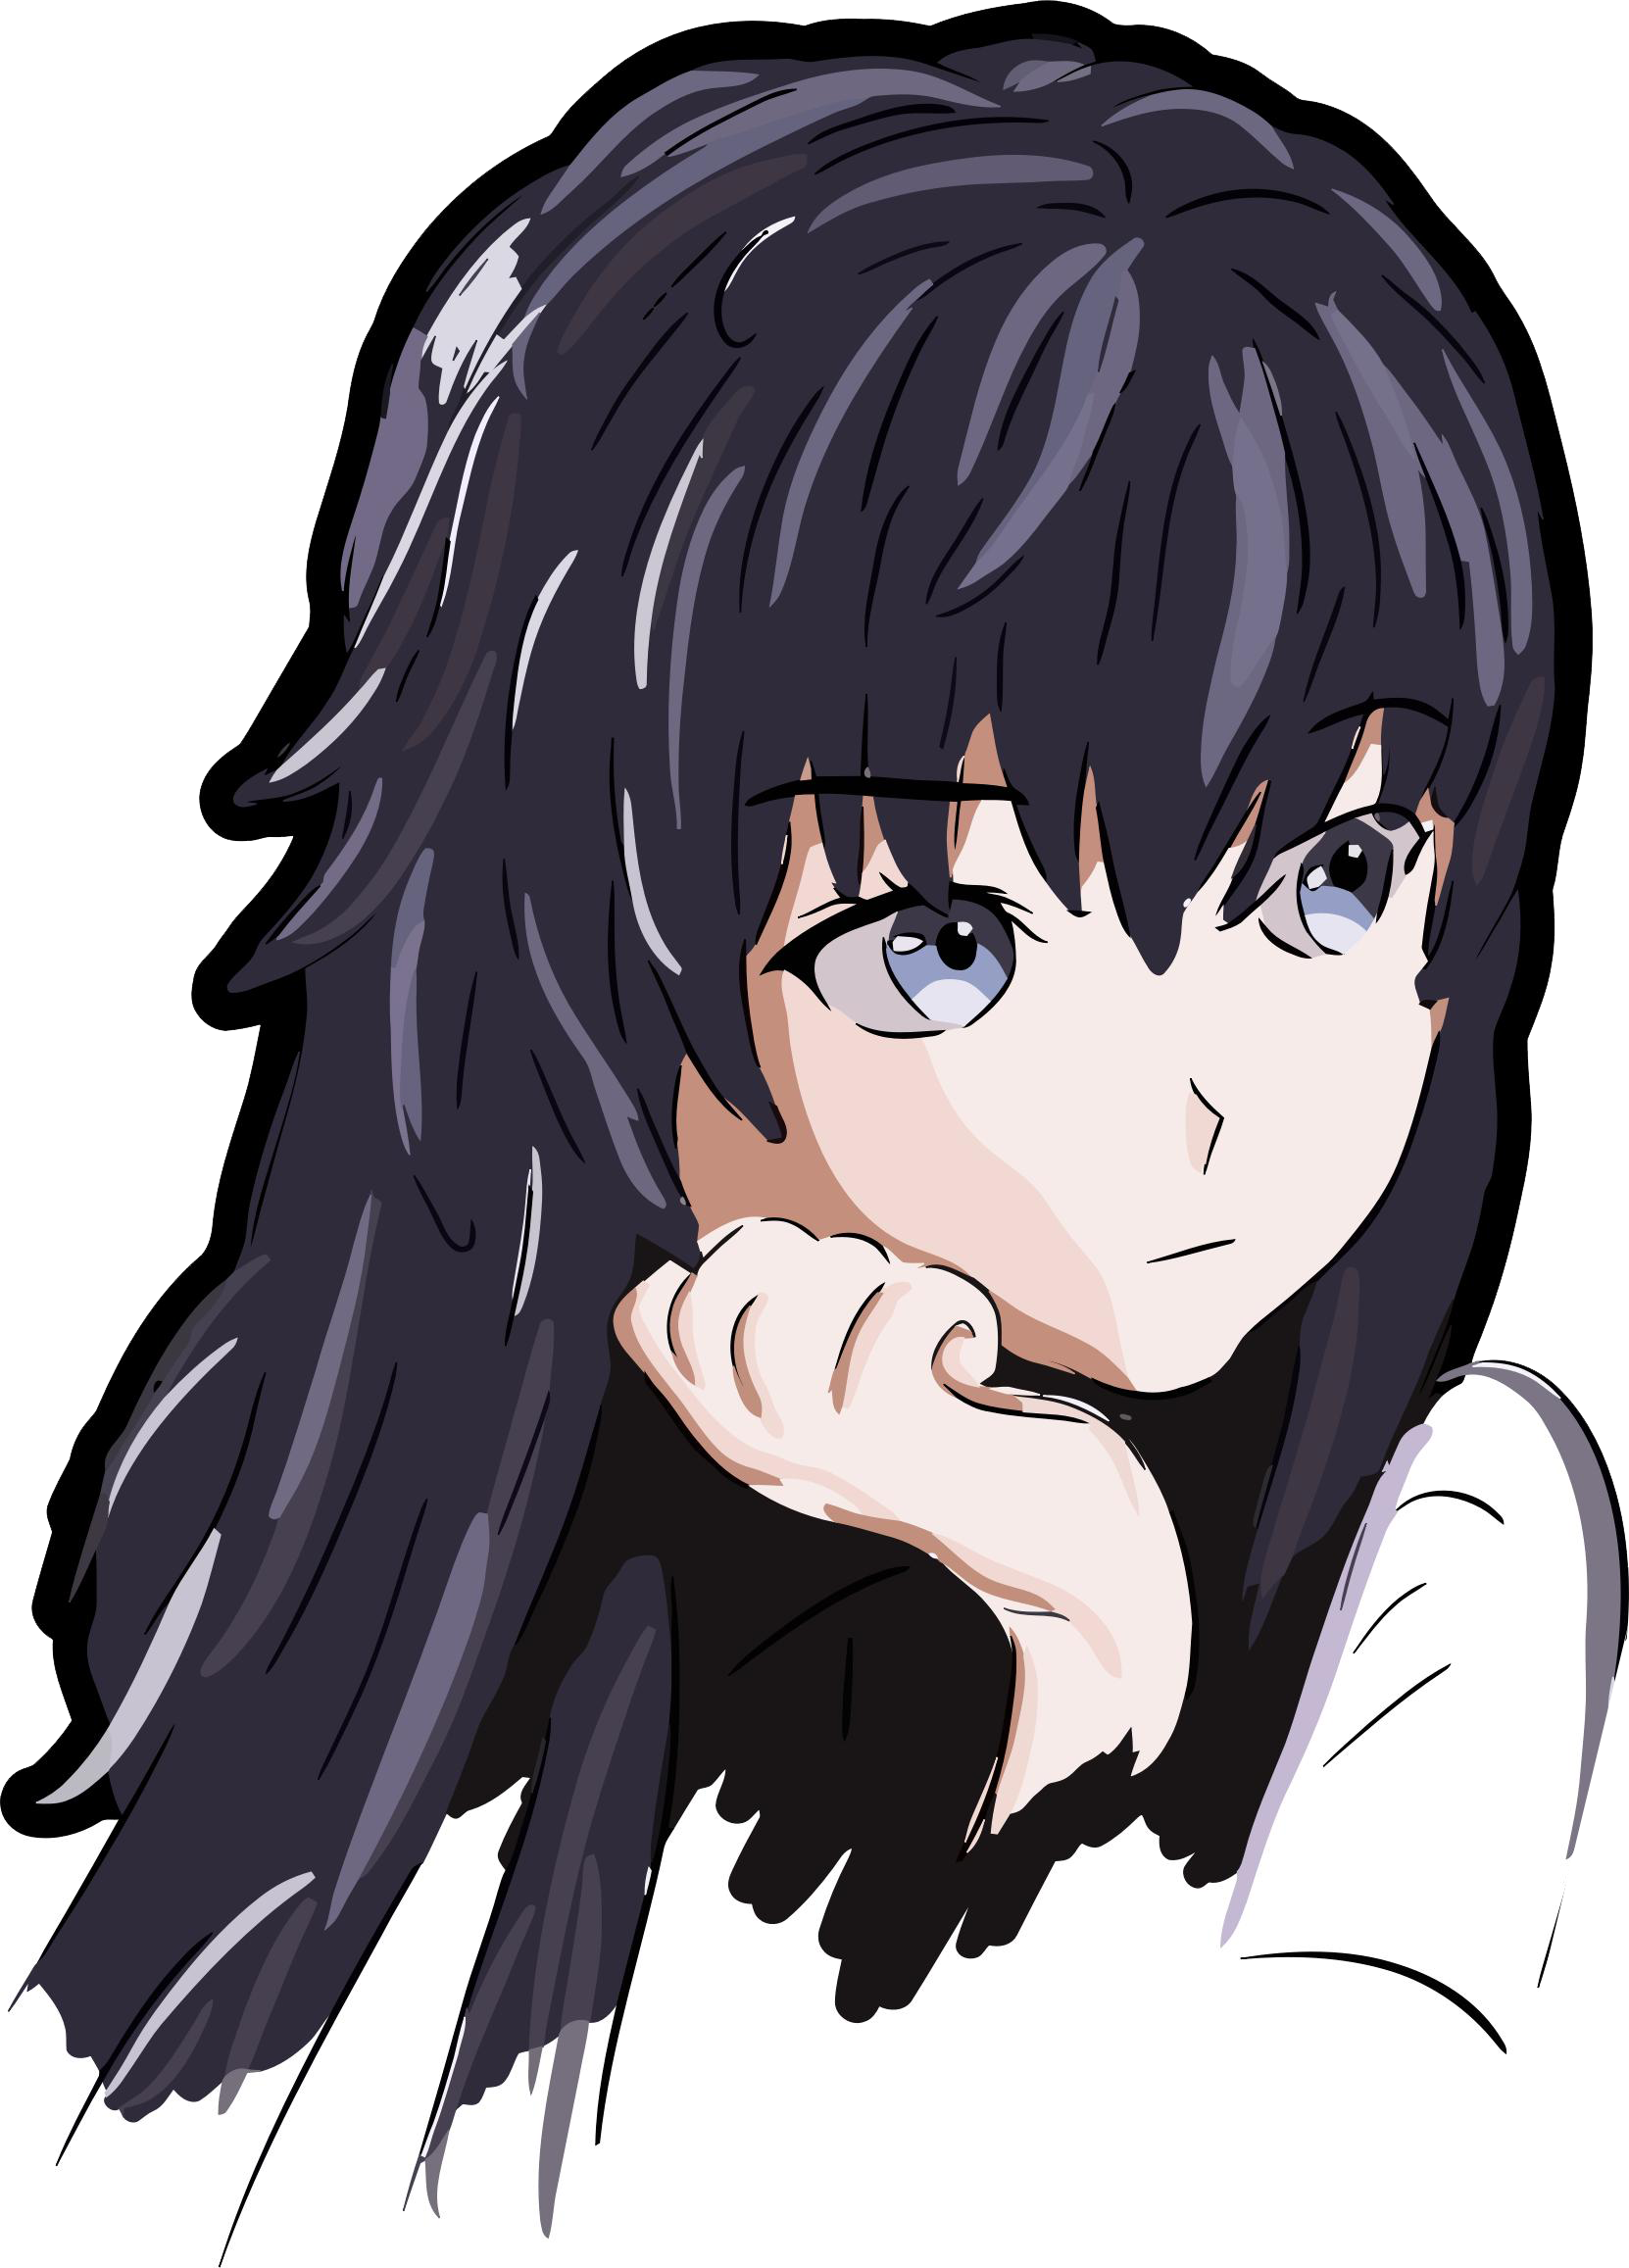 Anime Girl PNG Images Transparent Background | PNG Play